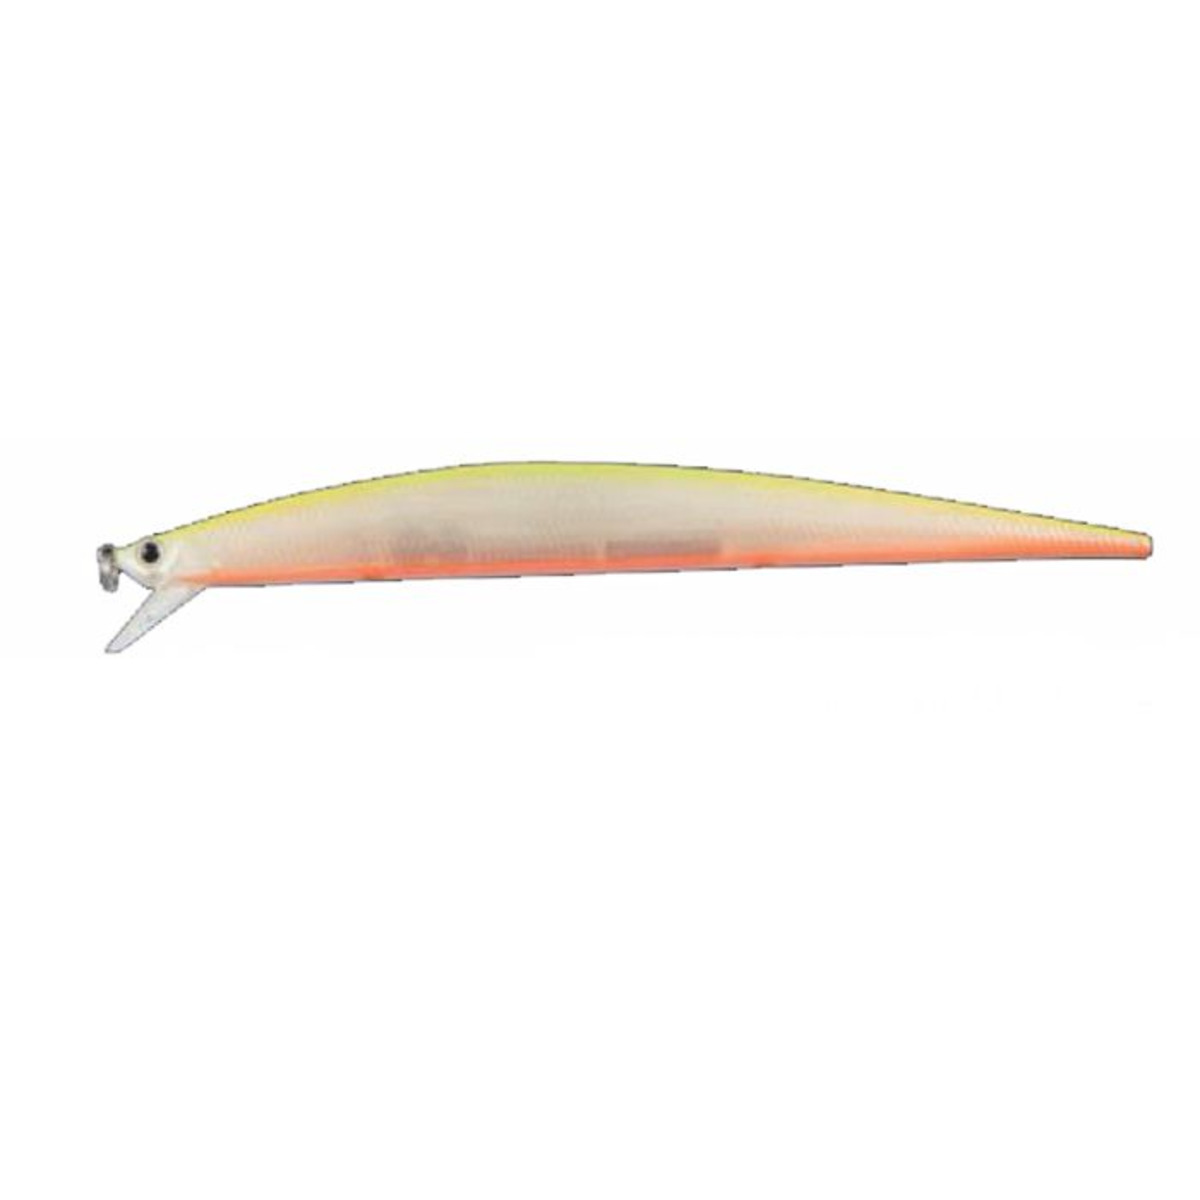 Herakles Rave 175 - 31 g - 175 mm - Chartreuse White 